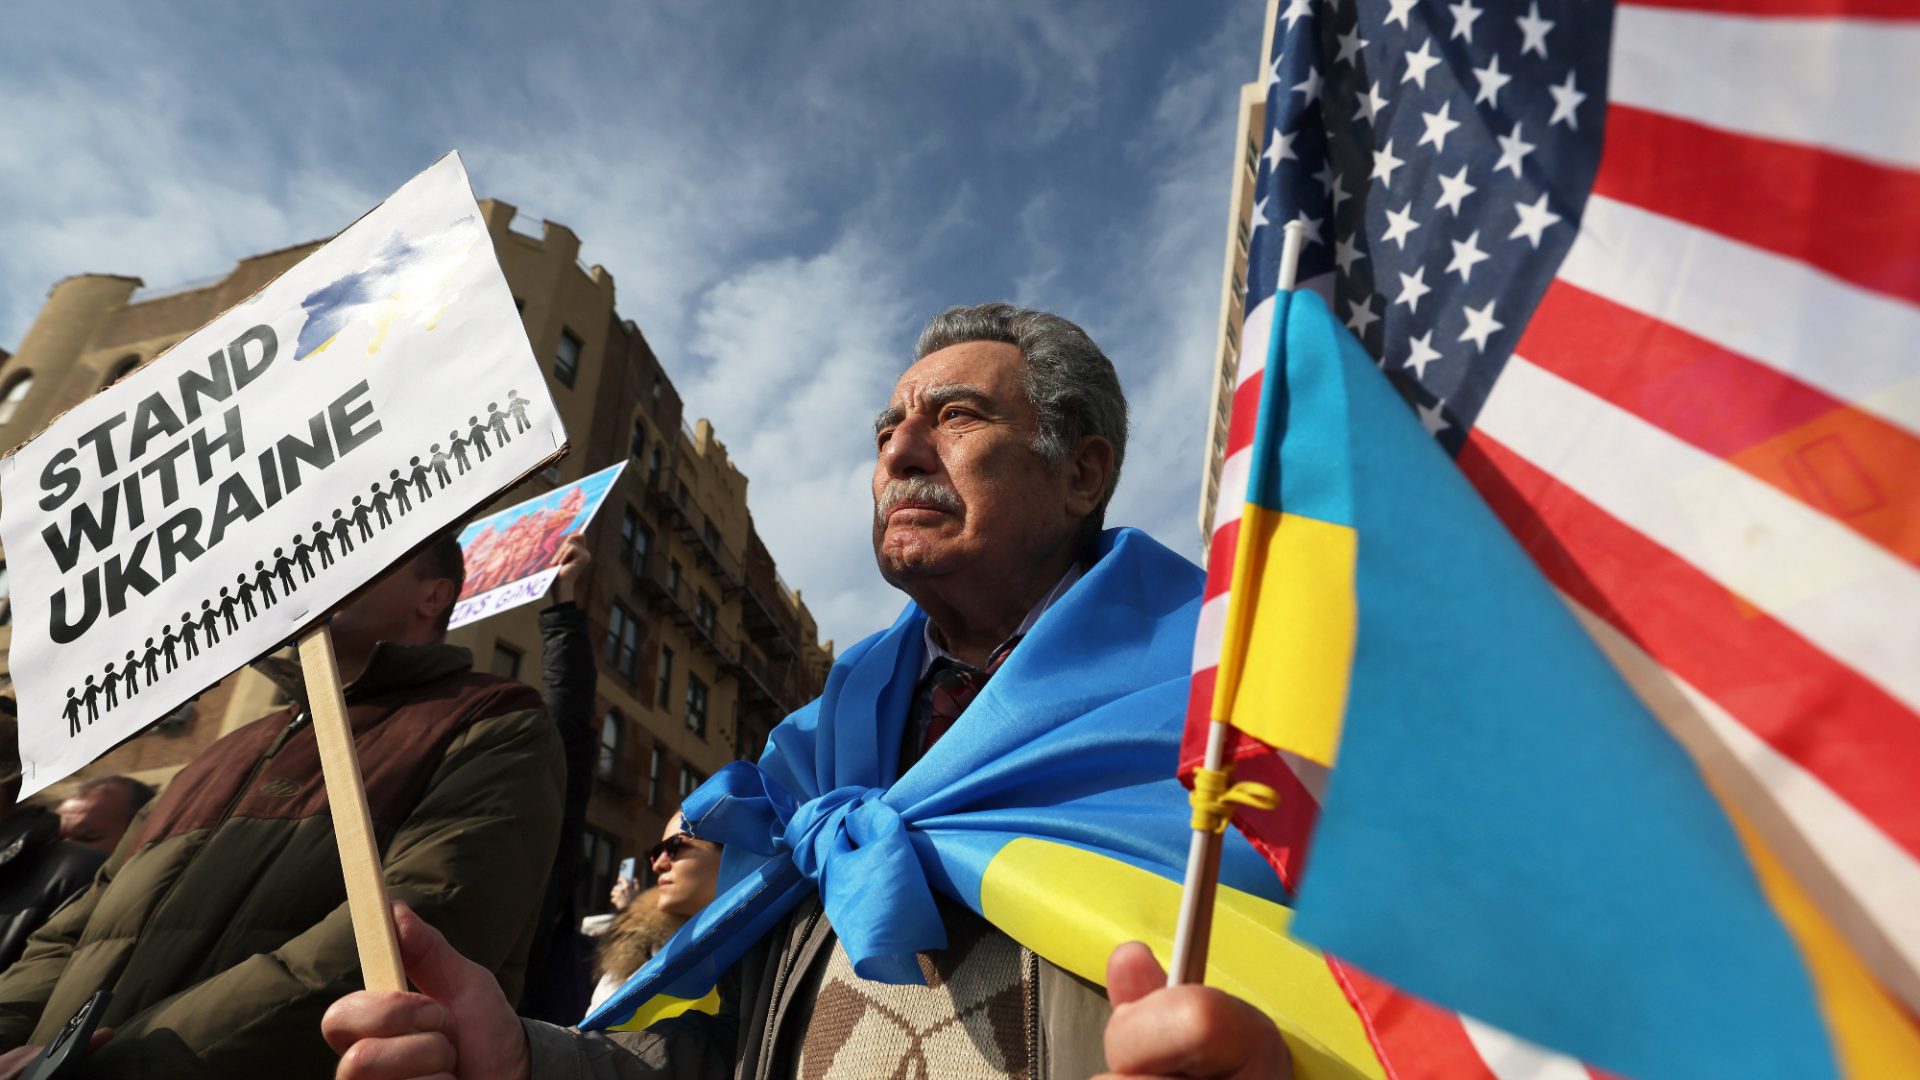 Lenny, who only gave his first name, joins people for a rally in support of Ukraine in Brighton Beach, New York on March 6, 2022, 11 days after the start of the war. Photo: Michael M Santiago/Getty